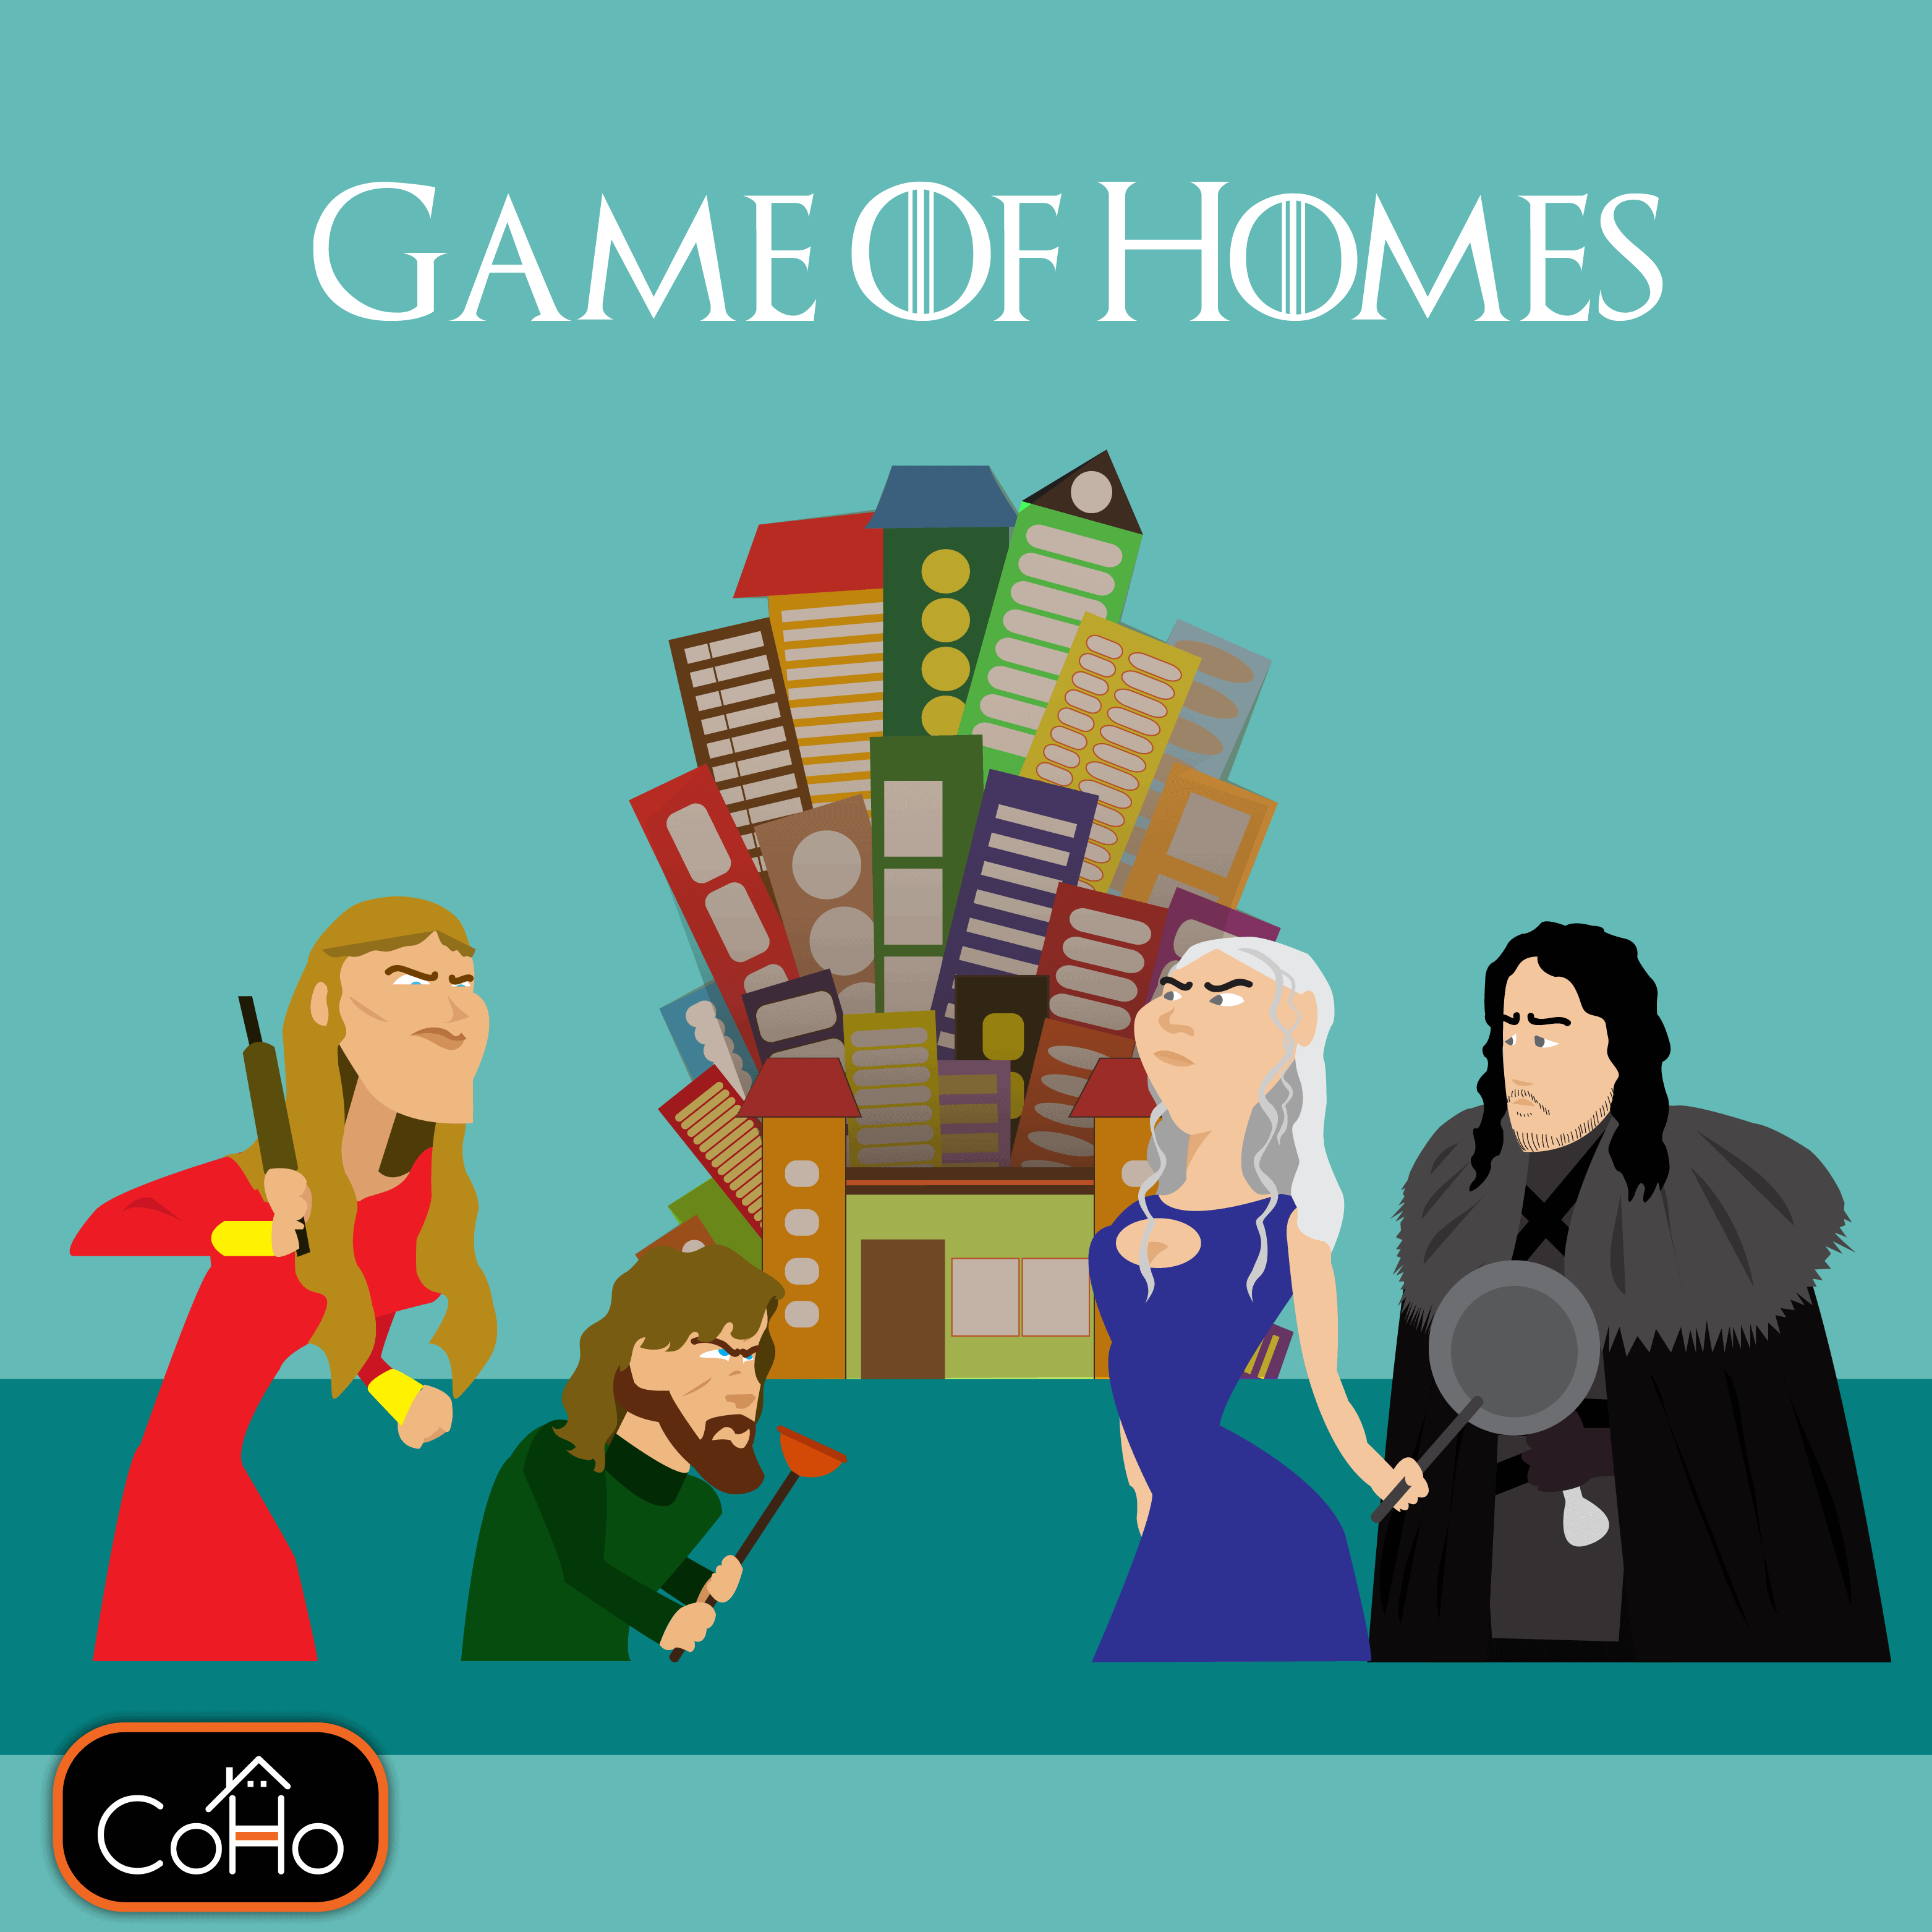 Game of homes